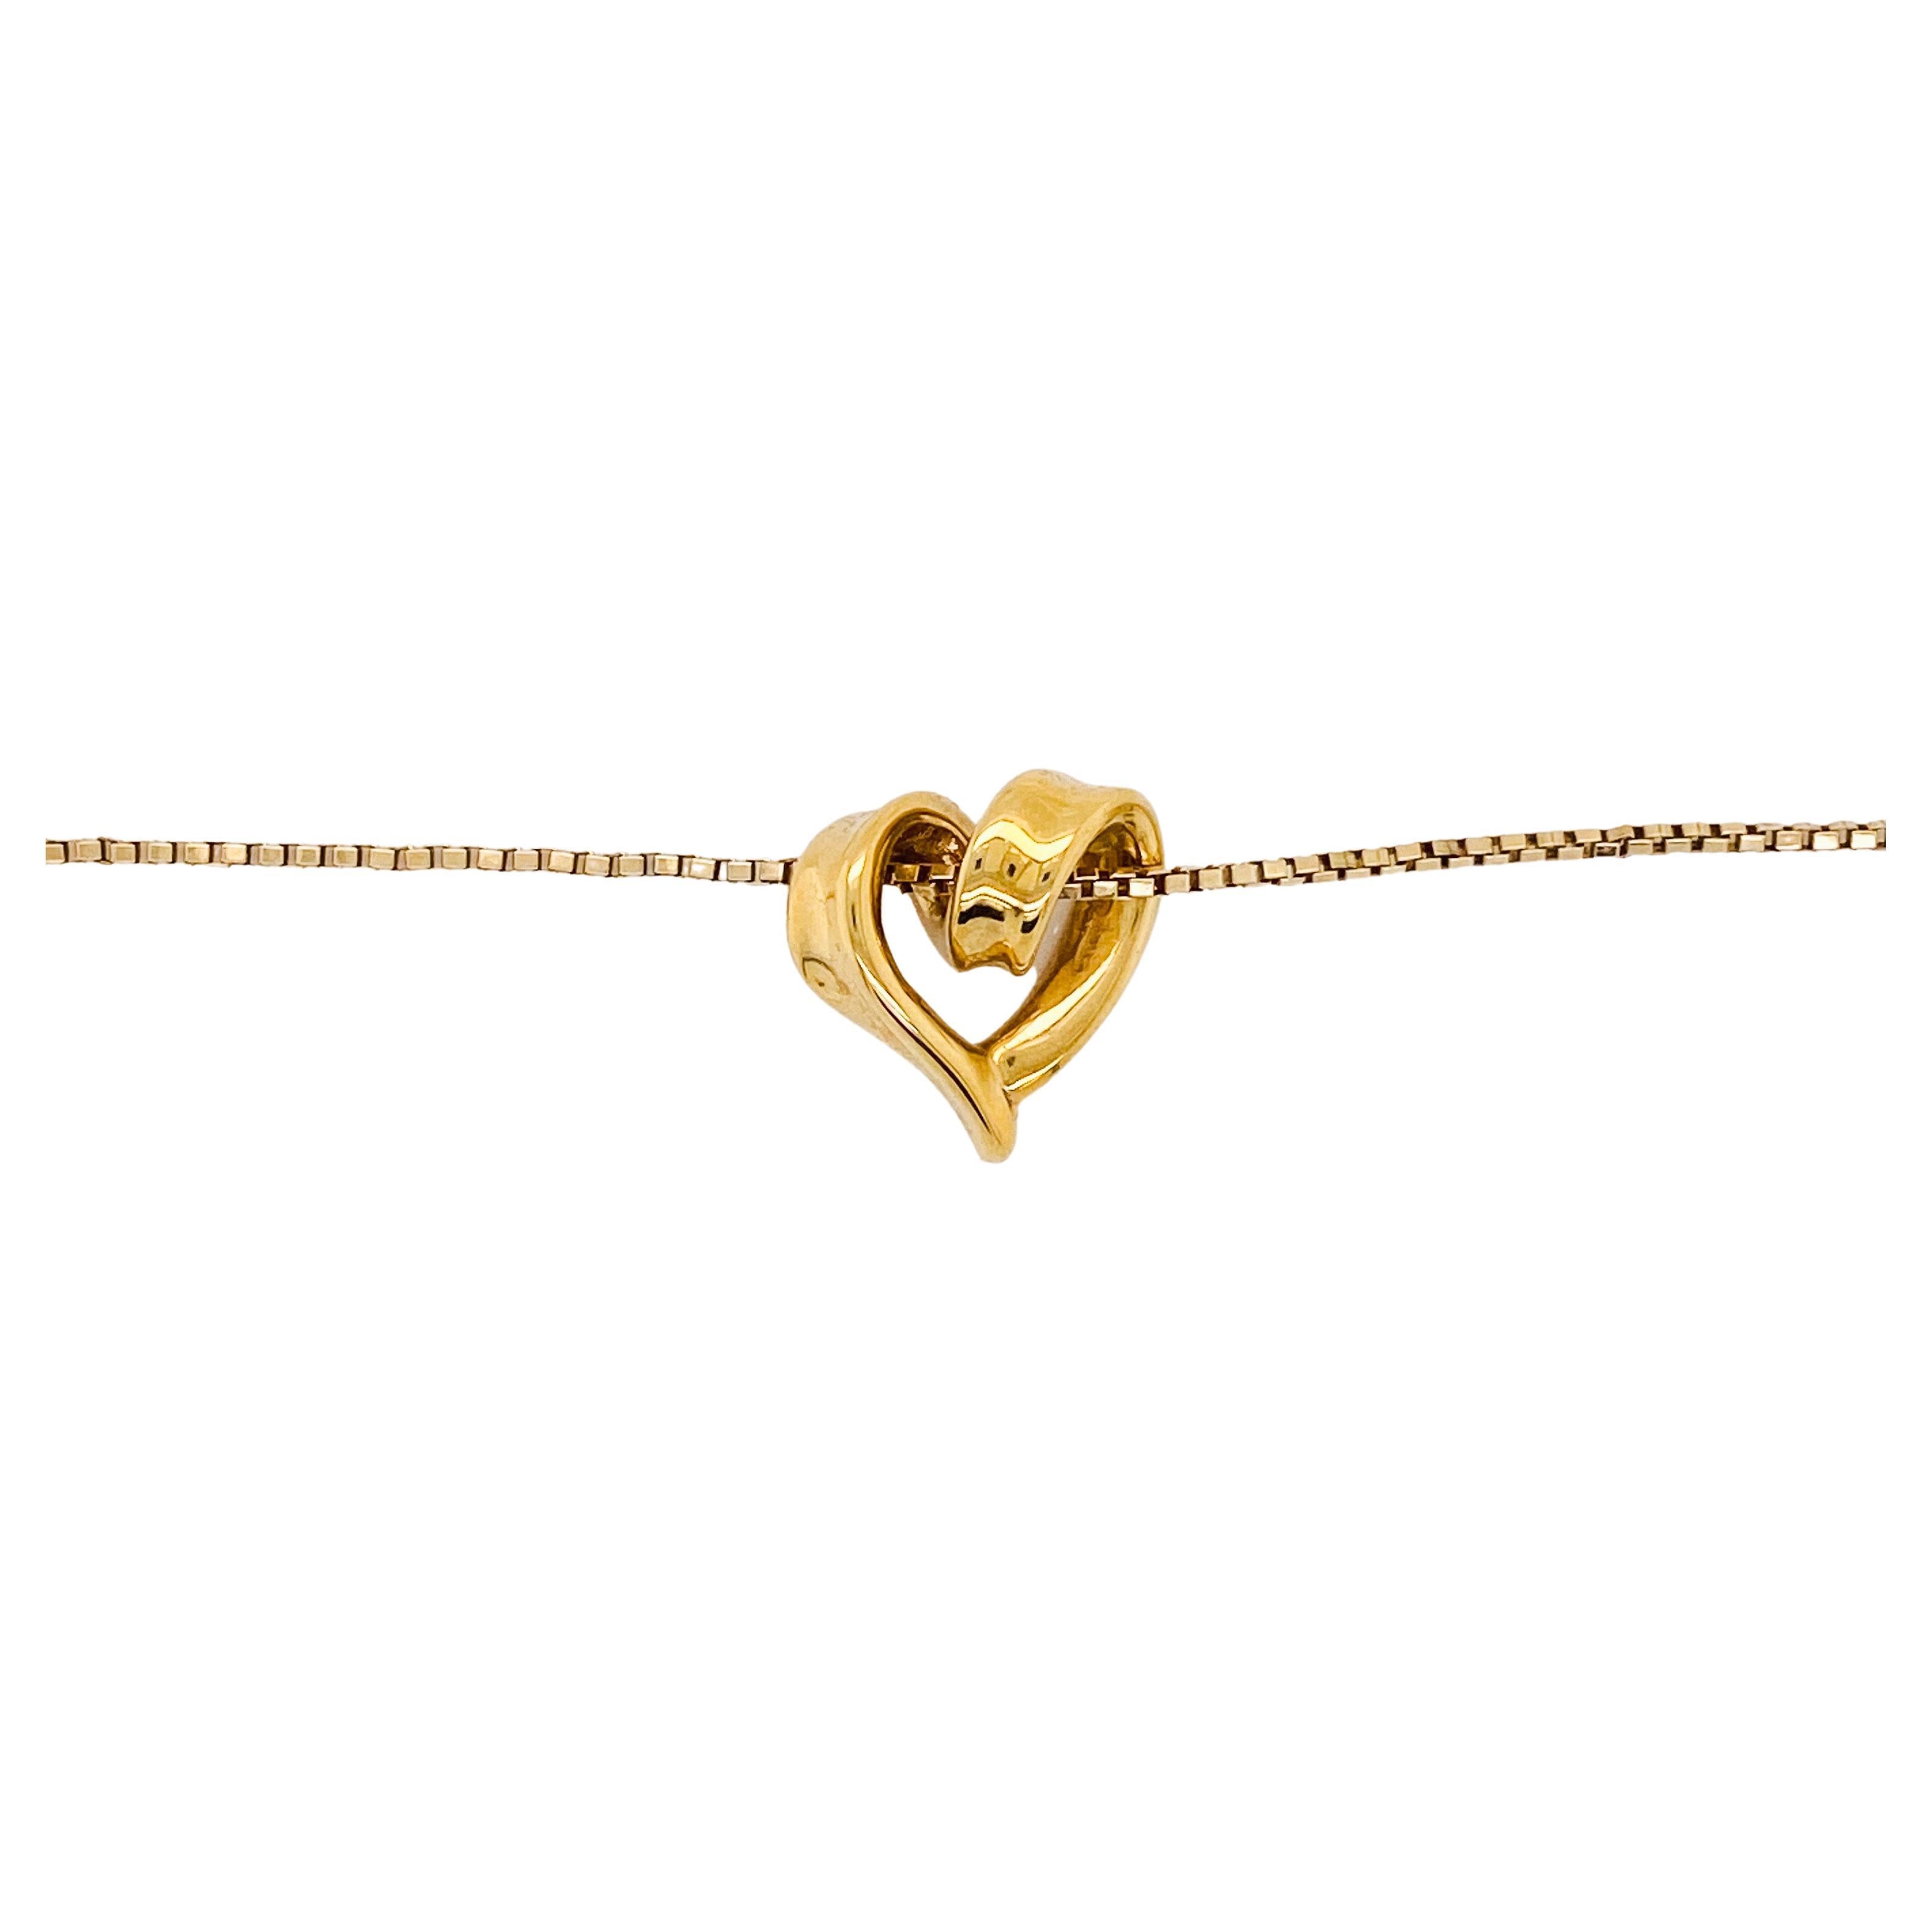 My Heart Belongs to You. Whimsical and well-made, this heart tells a story to all that wear it. The free-form ribbon style heart loops around just like your heart soaring with love. The bright box chain slides through the heart loops to keep your